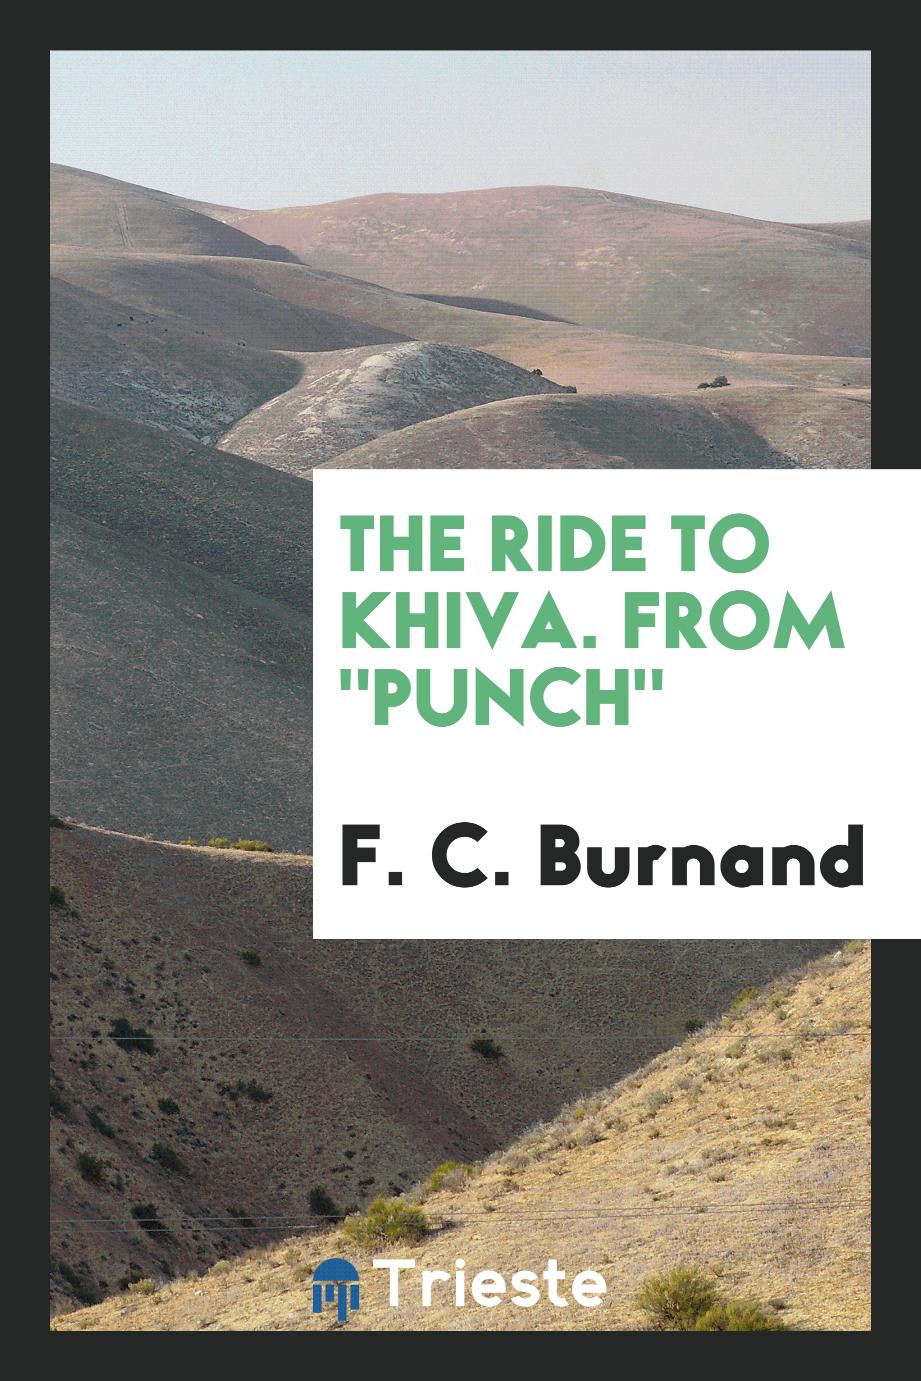 The Ride to Khiva. From "Punch"